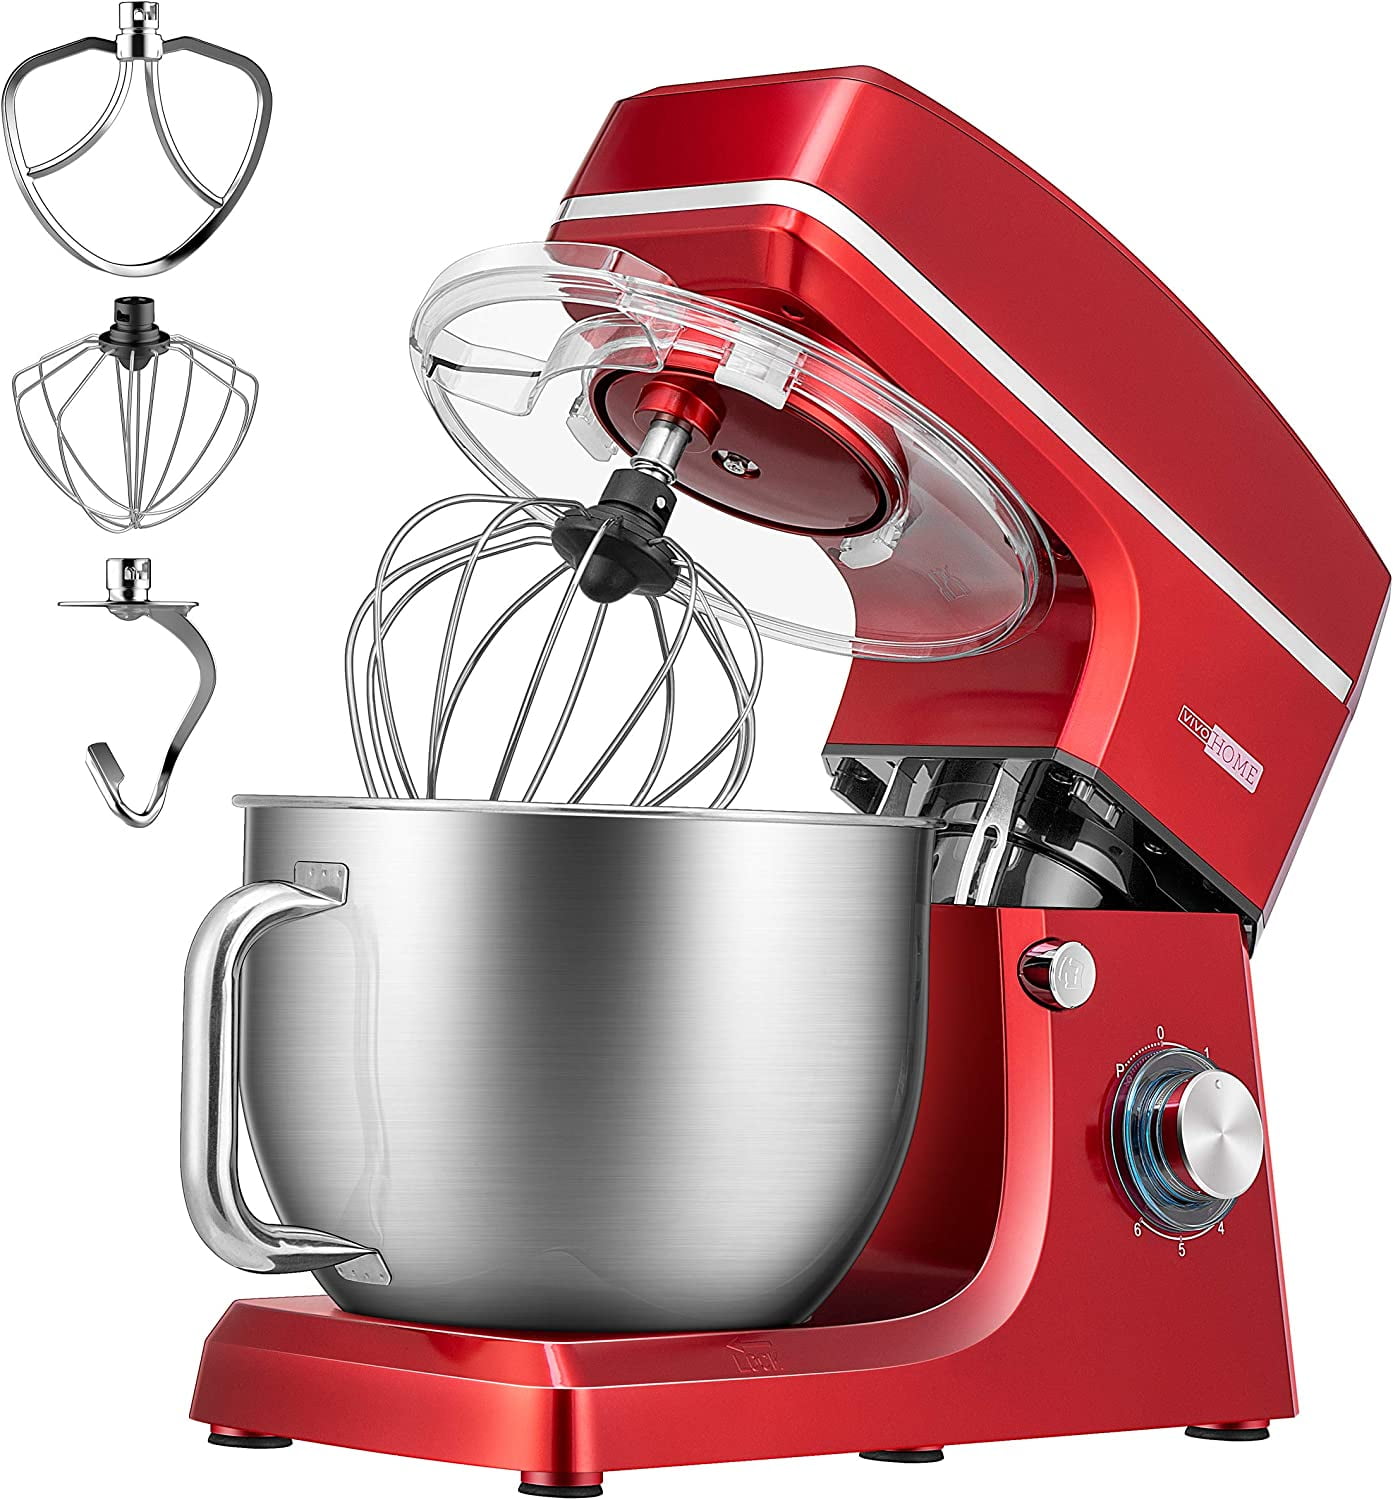 COSVALVE Stand Mixer, 660W Power Household Stand Mixers Multifunction Cake  Mixer kitchen Stand - Mixers & Blenders - Miami, Florida